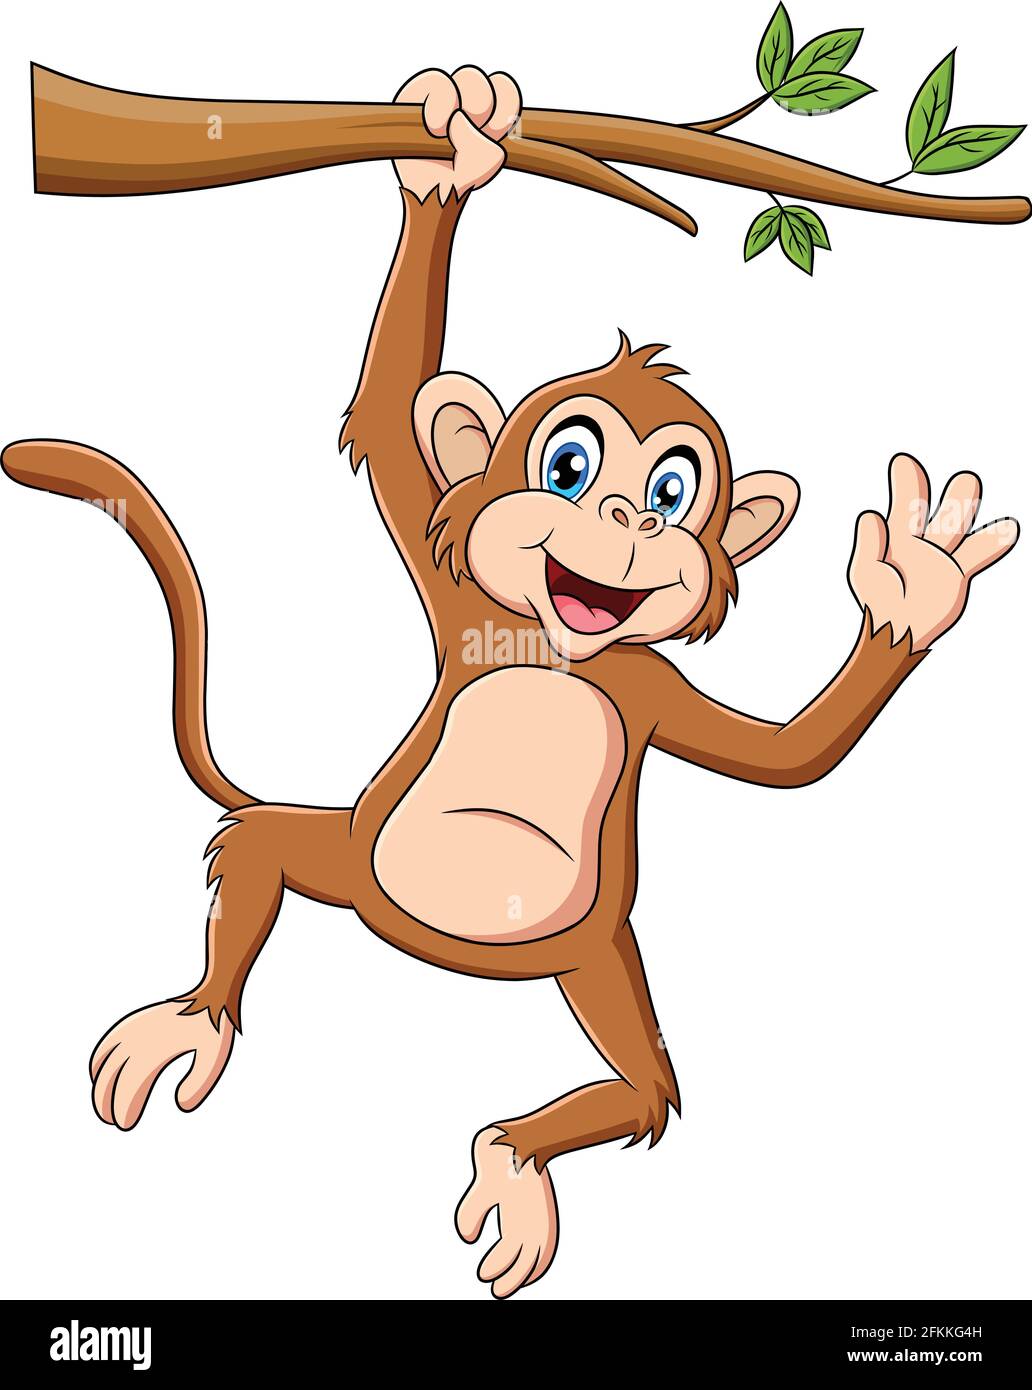 Cute Monkey hanging on a tree branches cartoon animal vector illustration  Stock Vector Image & Art - Alamy